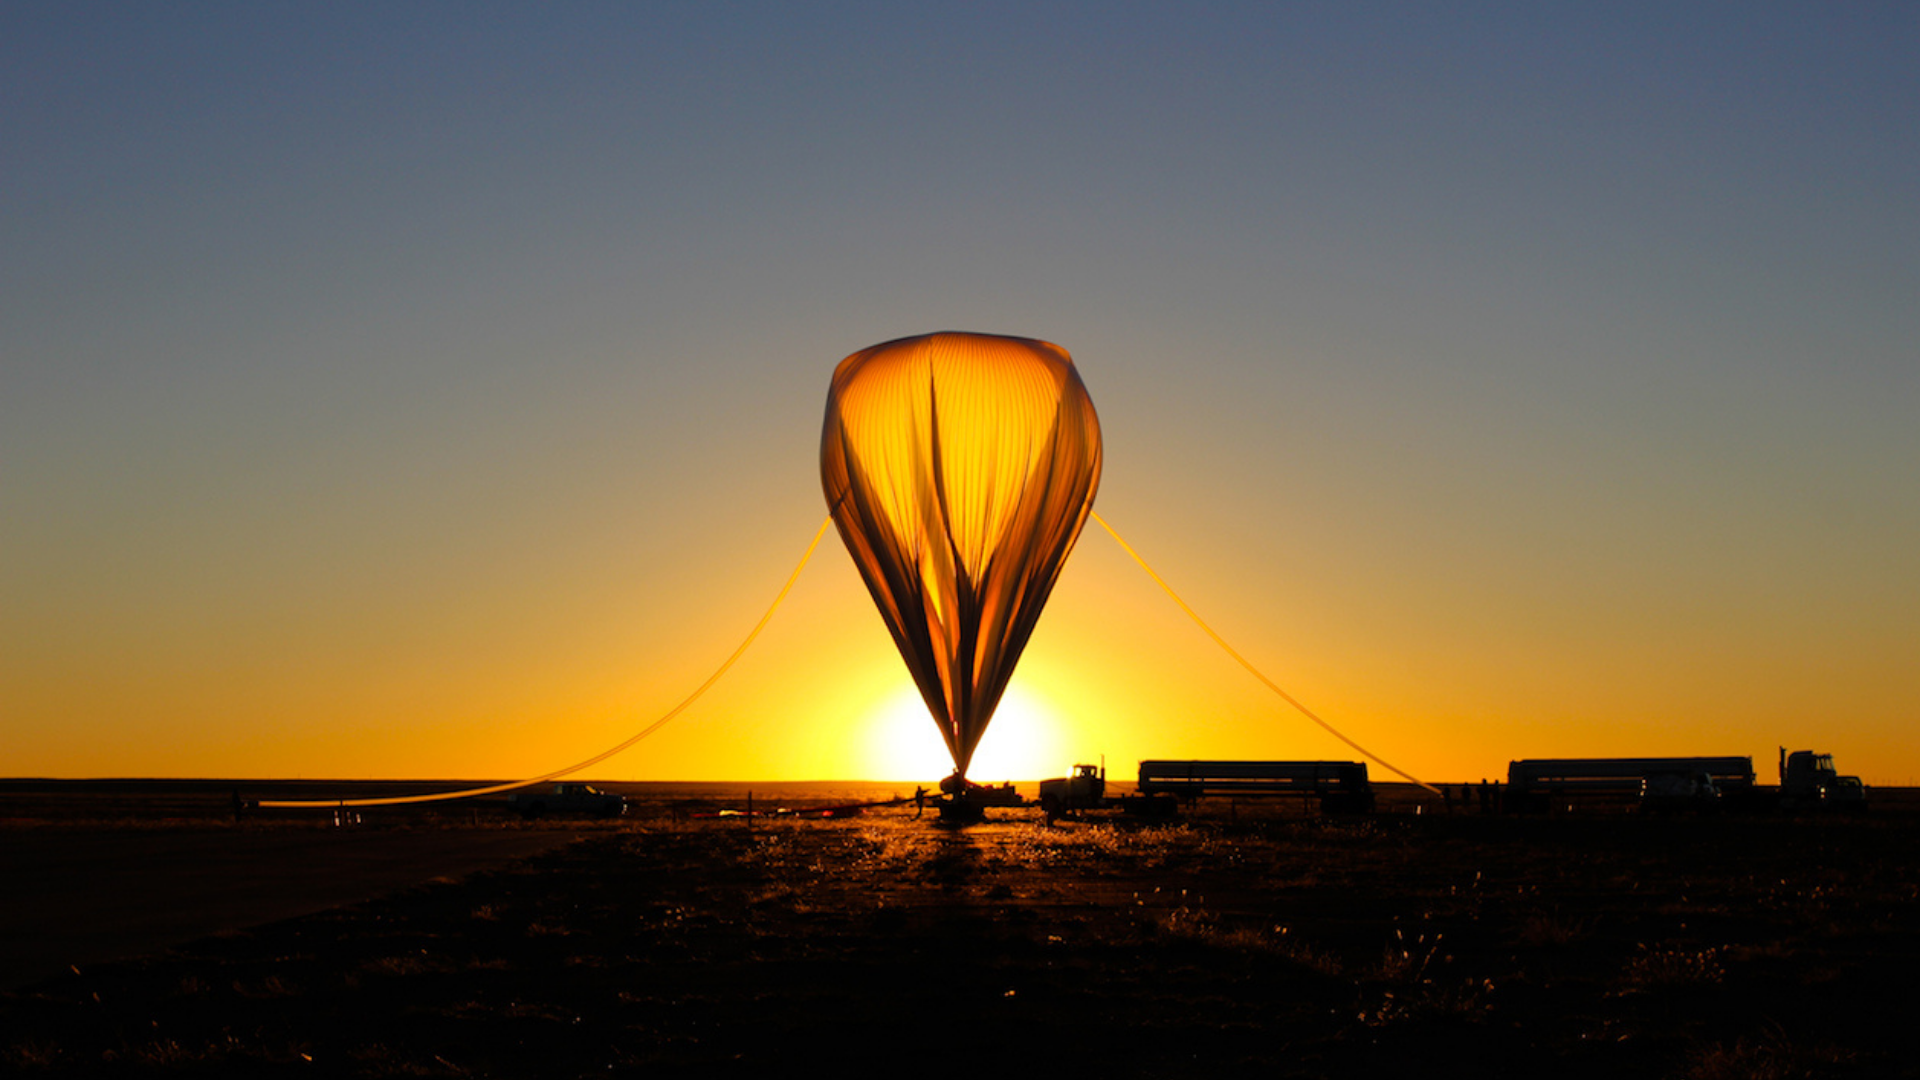 The sun rises in Fort Sumner, NM, as the HySICS payload is readied for launch on a high-altitude baloon. (2014, Credit: NASA)